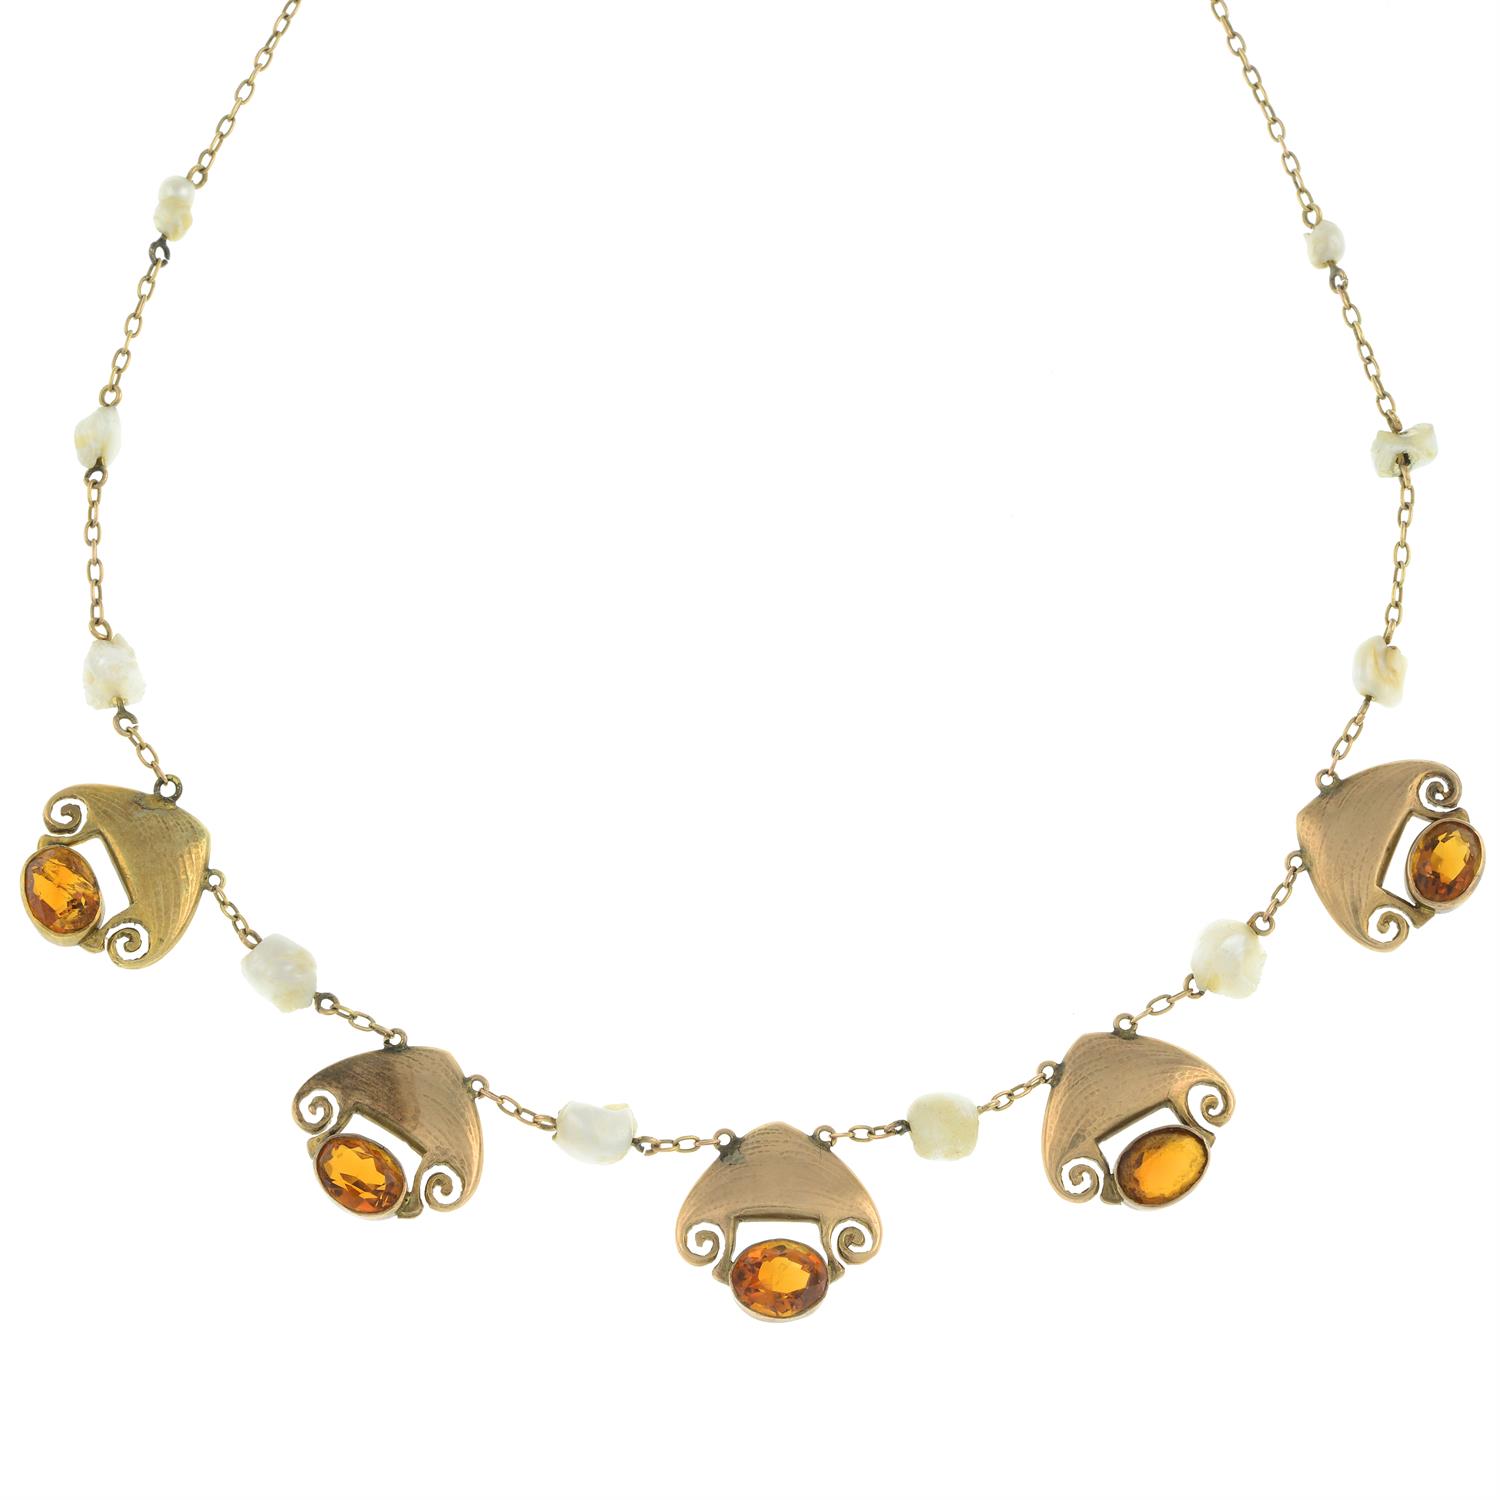 Citrine and baroque pearl necklace, by Liberty & Co. - Bild 2 aus 6